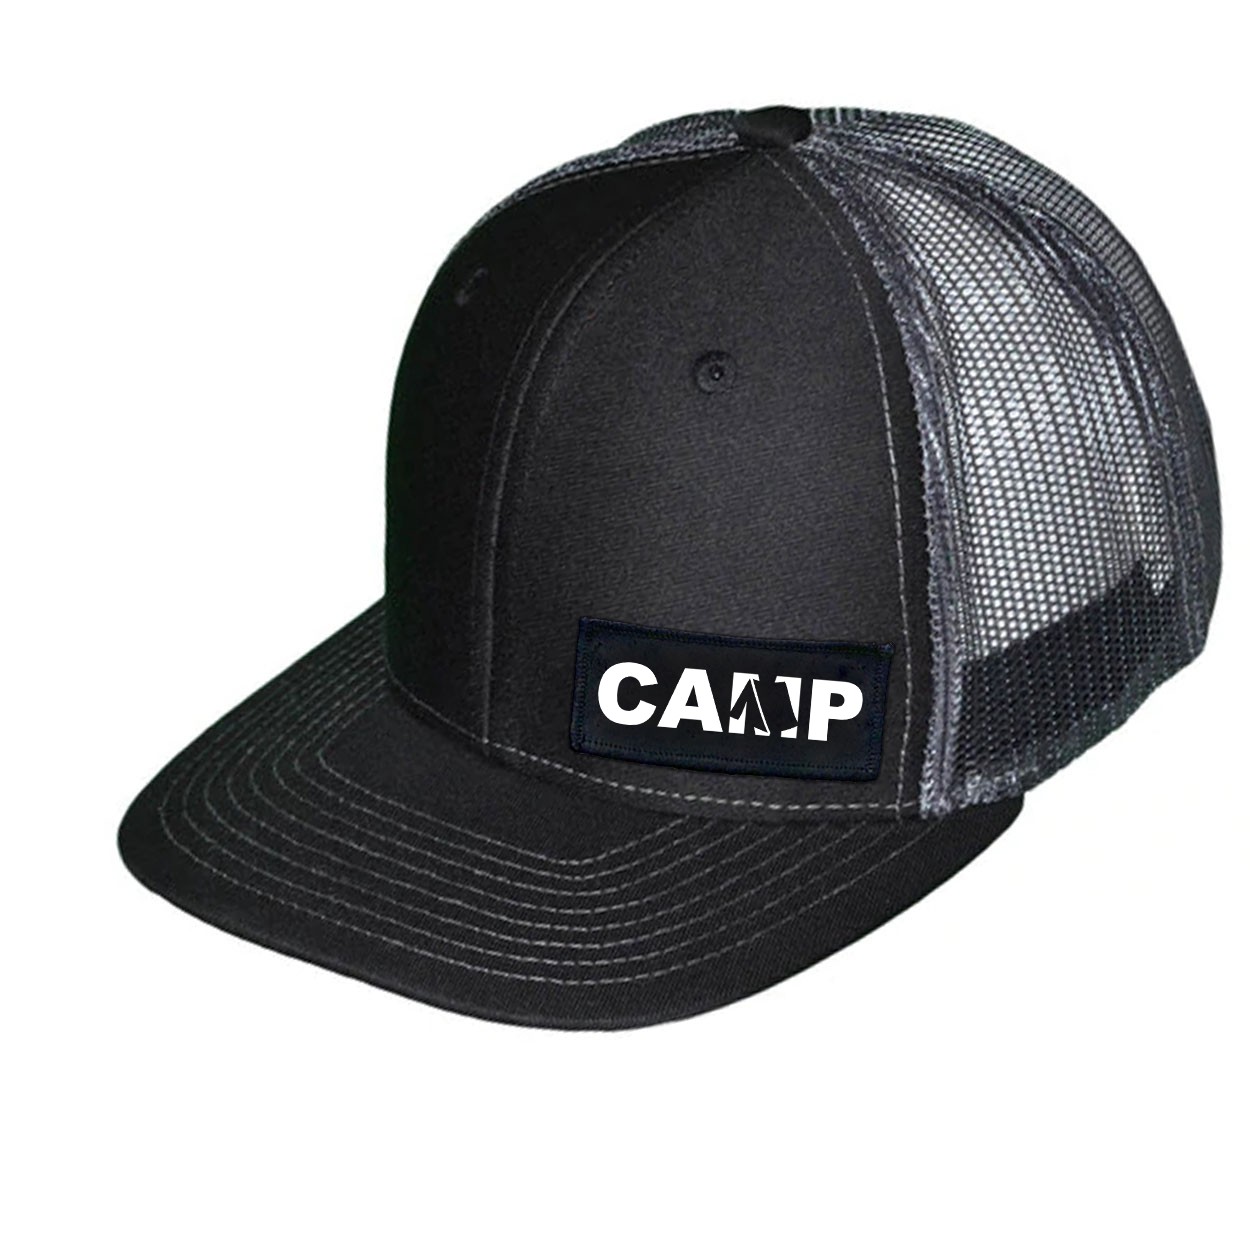 Camp Tent Logo Night Out Woven Patch Snapback Trucker Hat Black/Gray (White Logo)